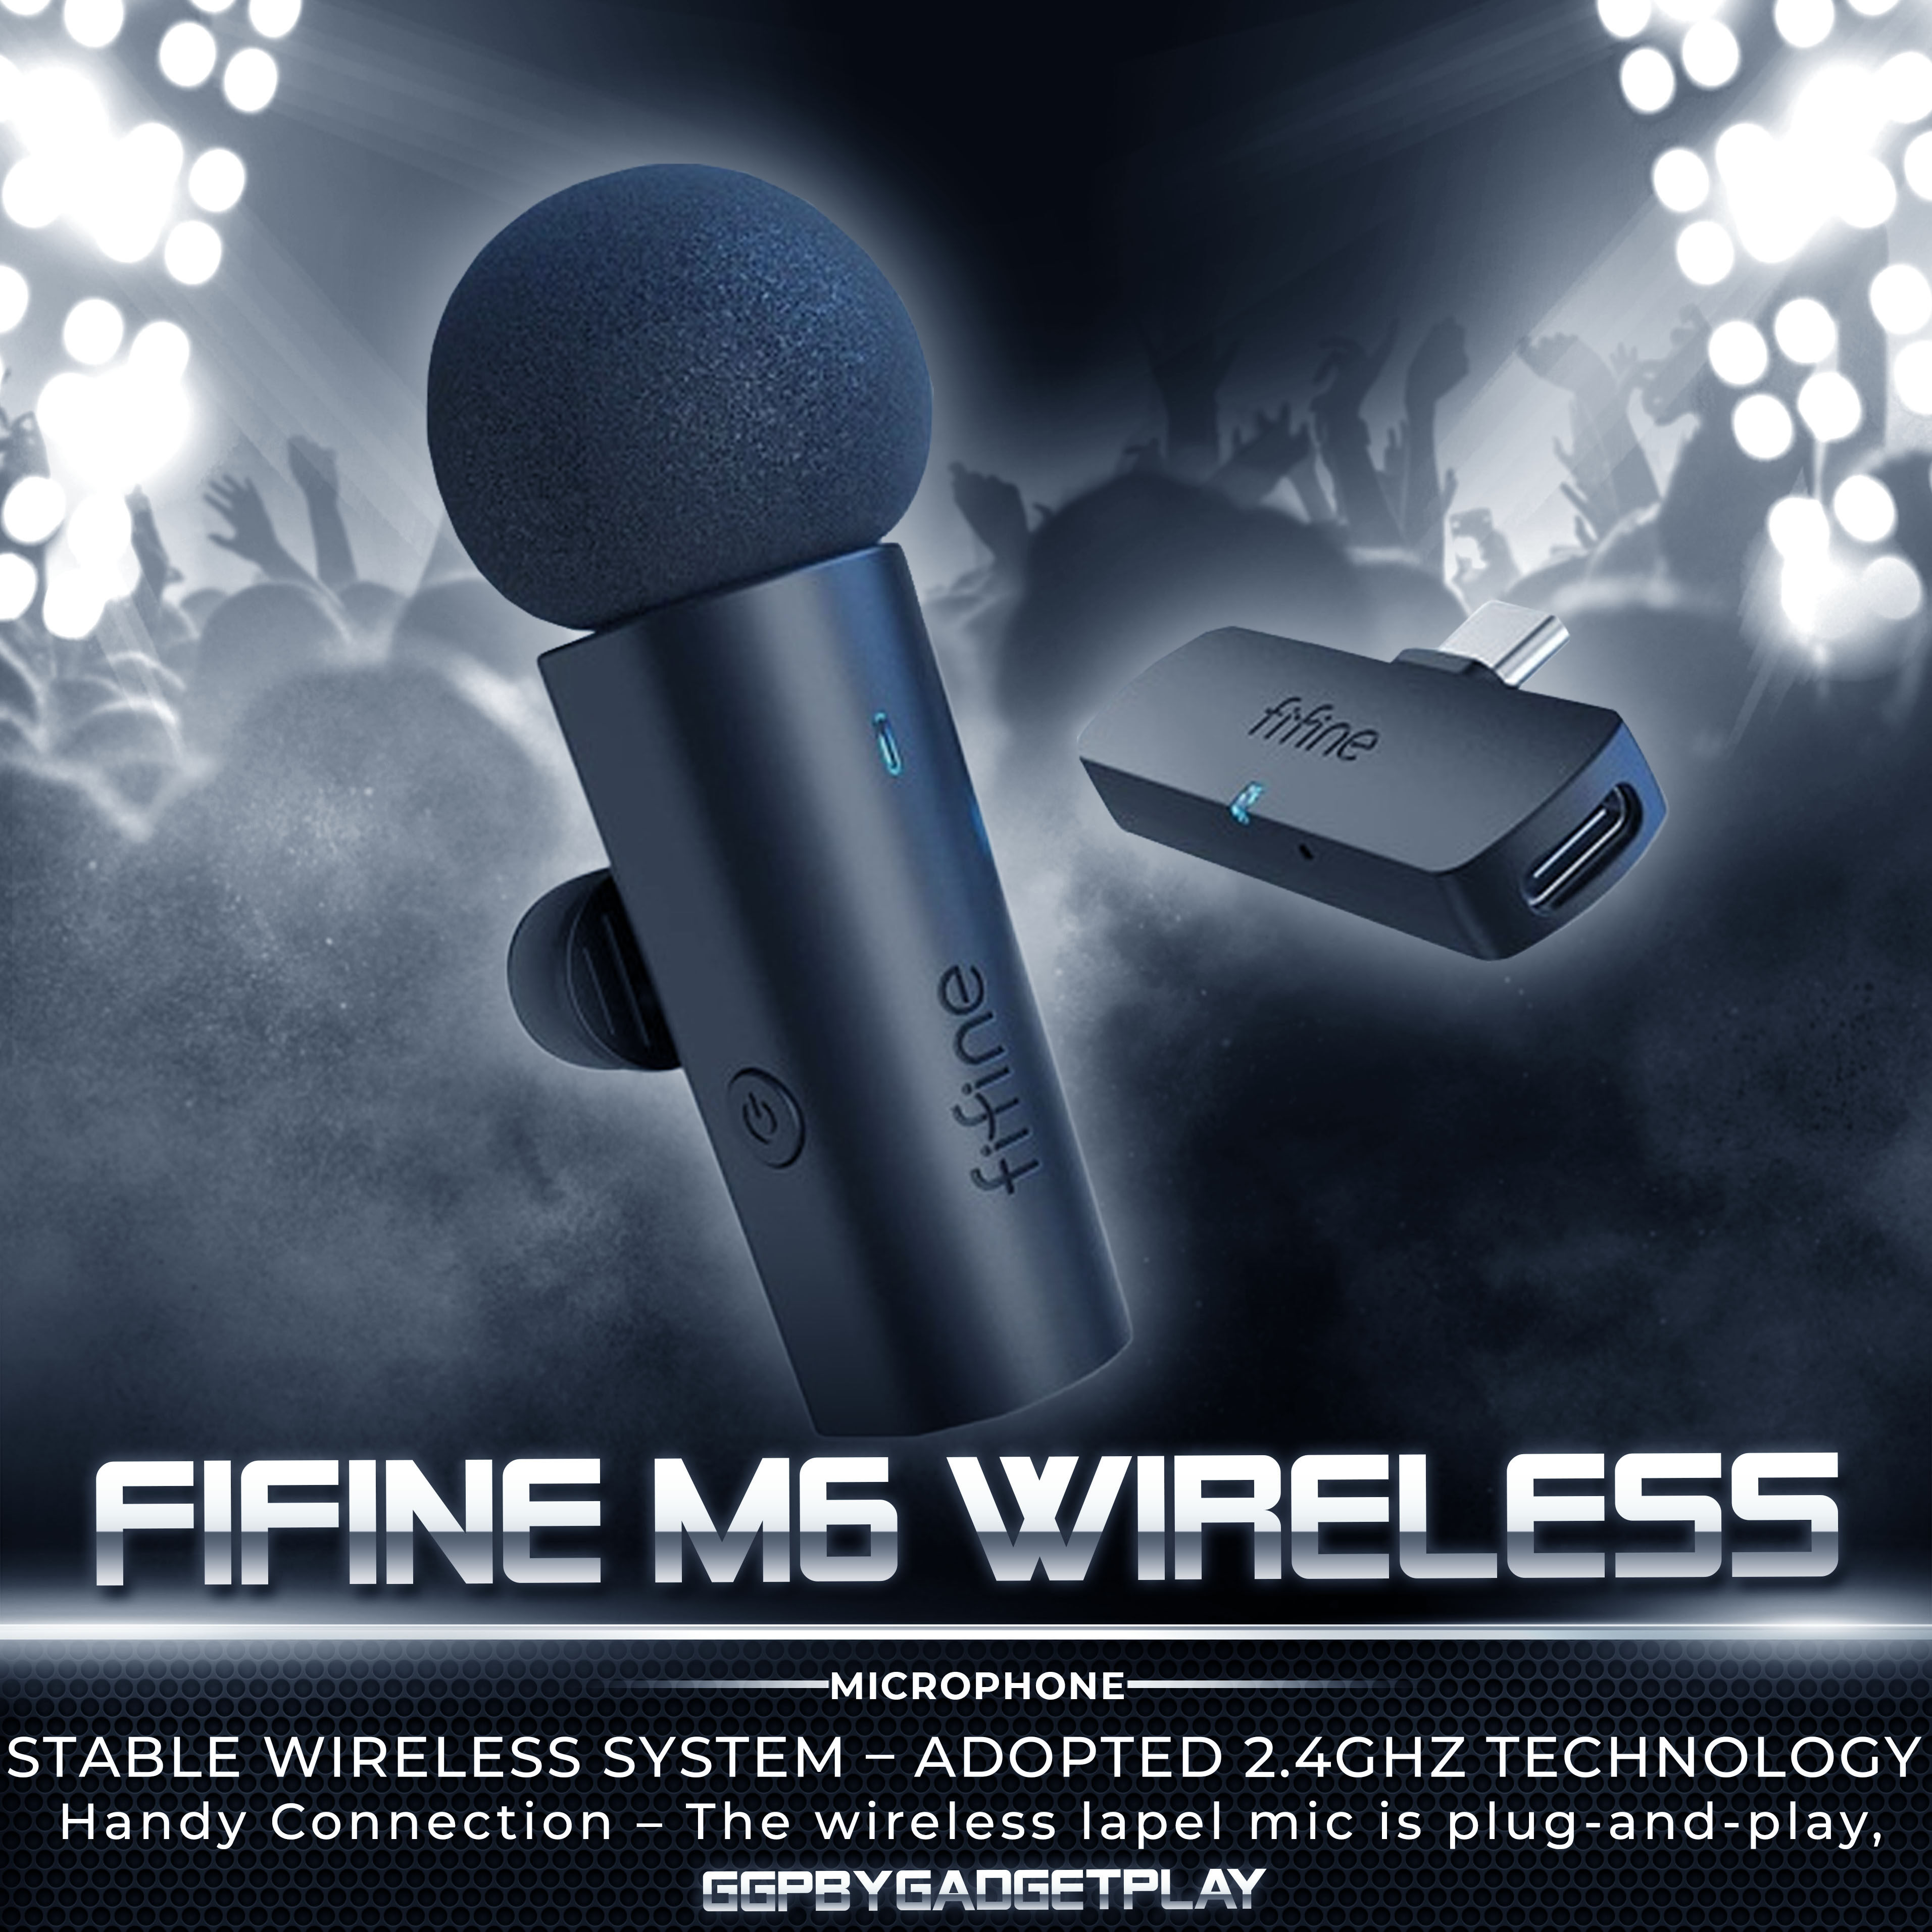 FIFINE M6 Wireless Lapel Microphone for Android to Go Live on  TikTok/Instagram, Record Vlog, Have Conferencing